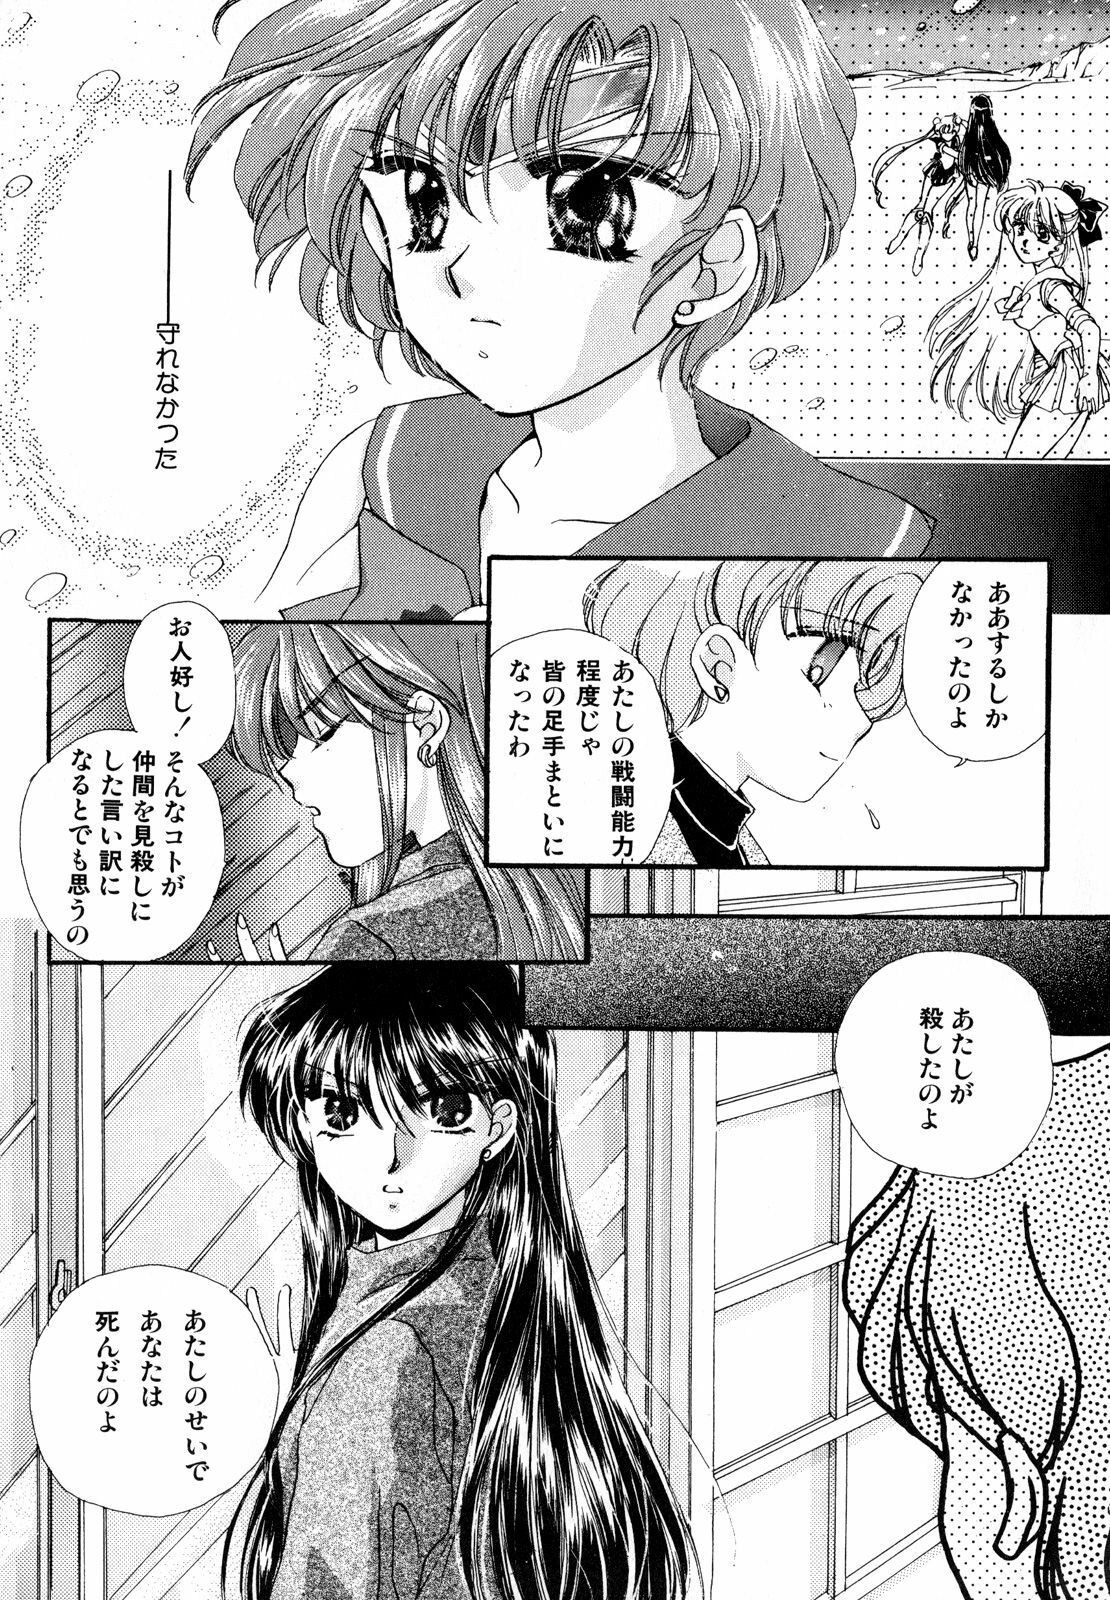 [Anthology] Lunatic Party 3 (Sailor Moon) page 22 full